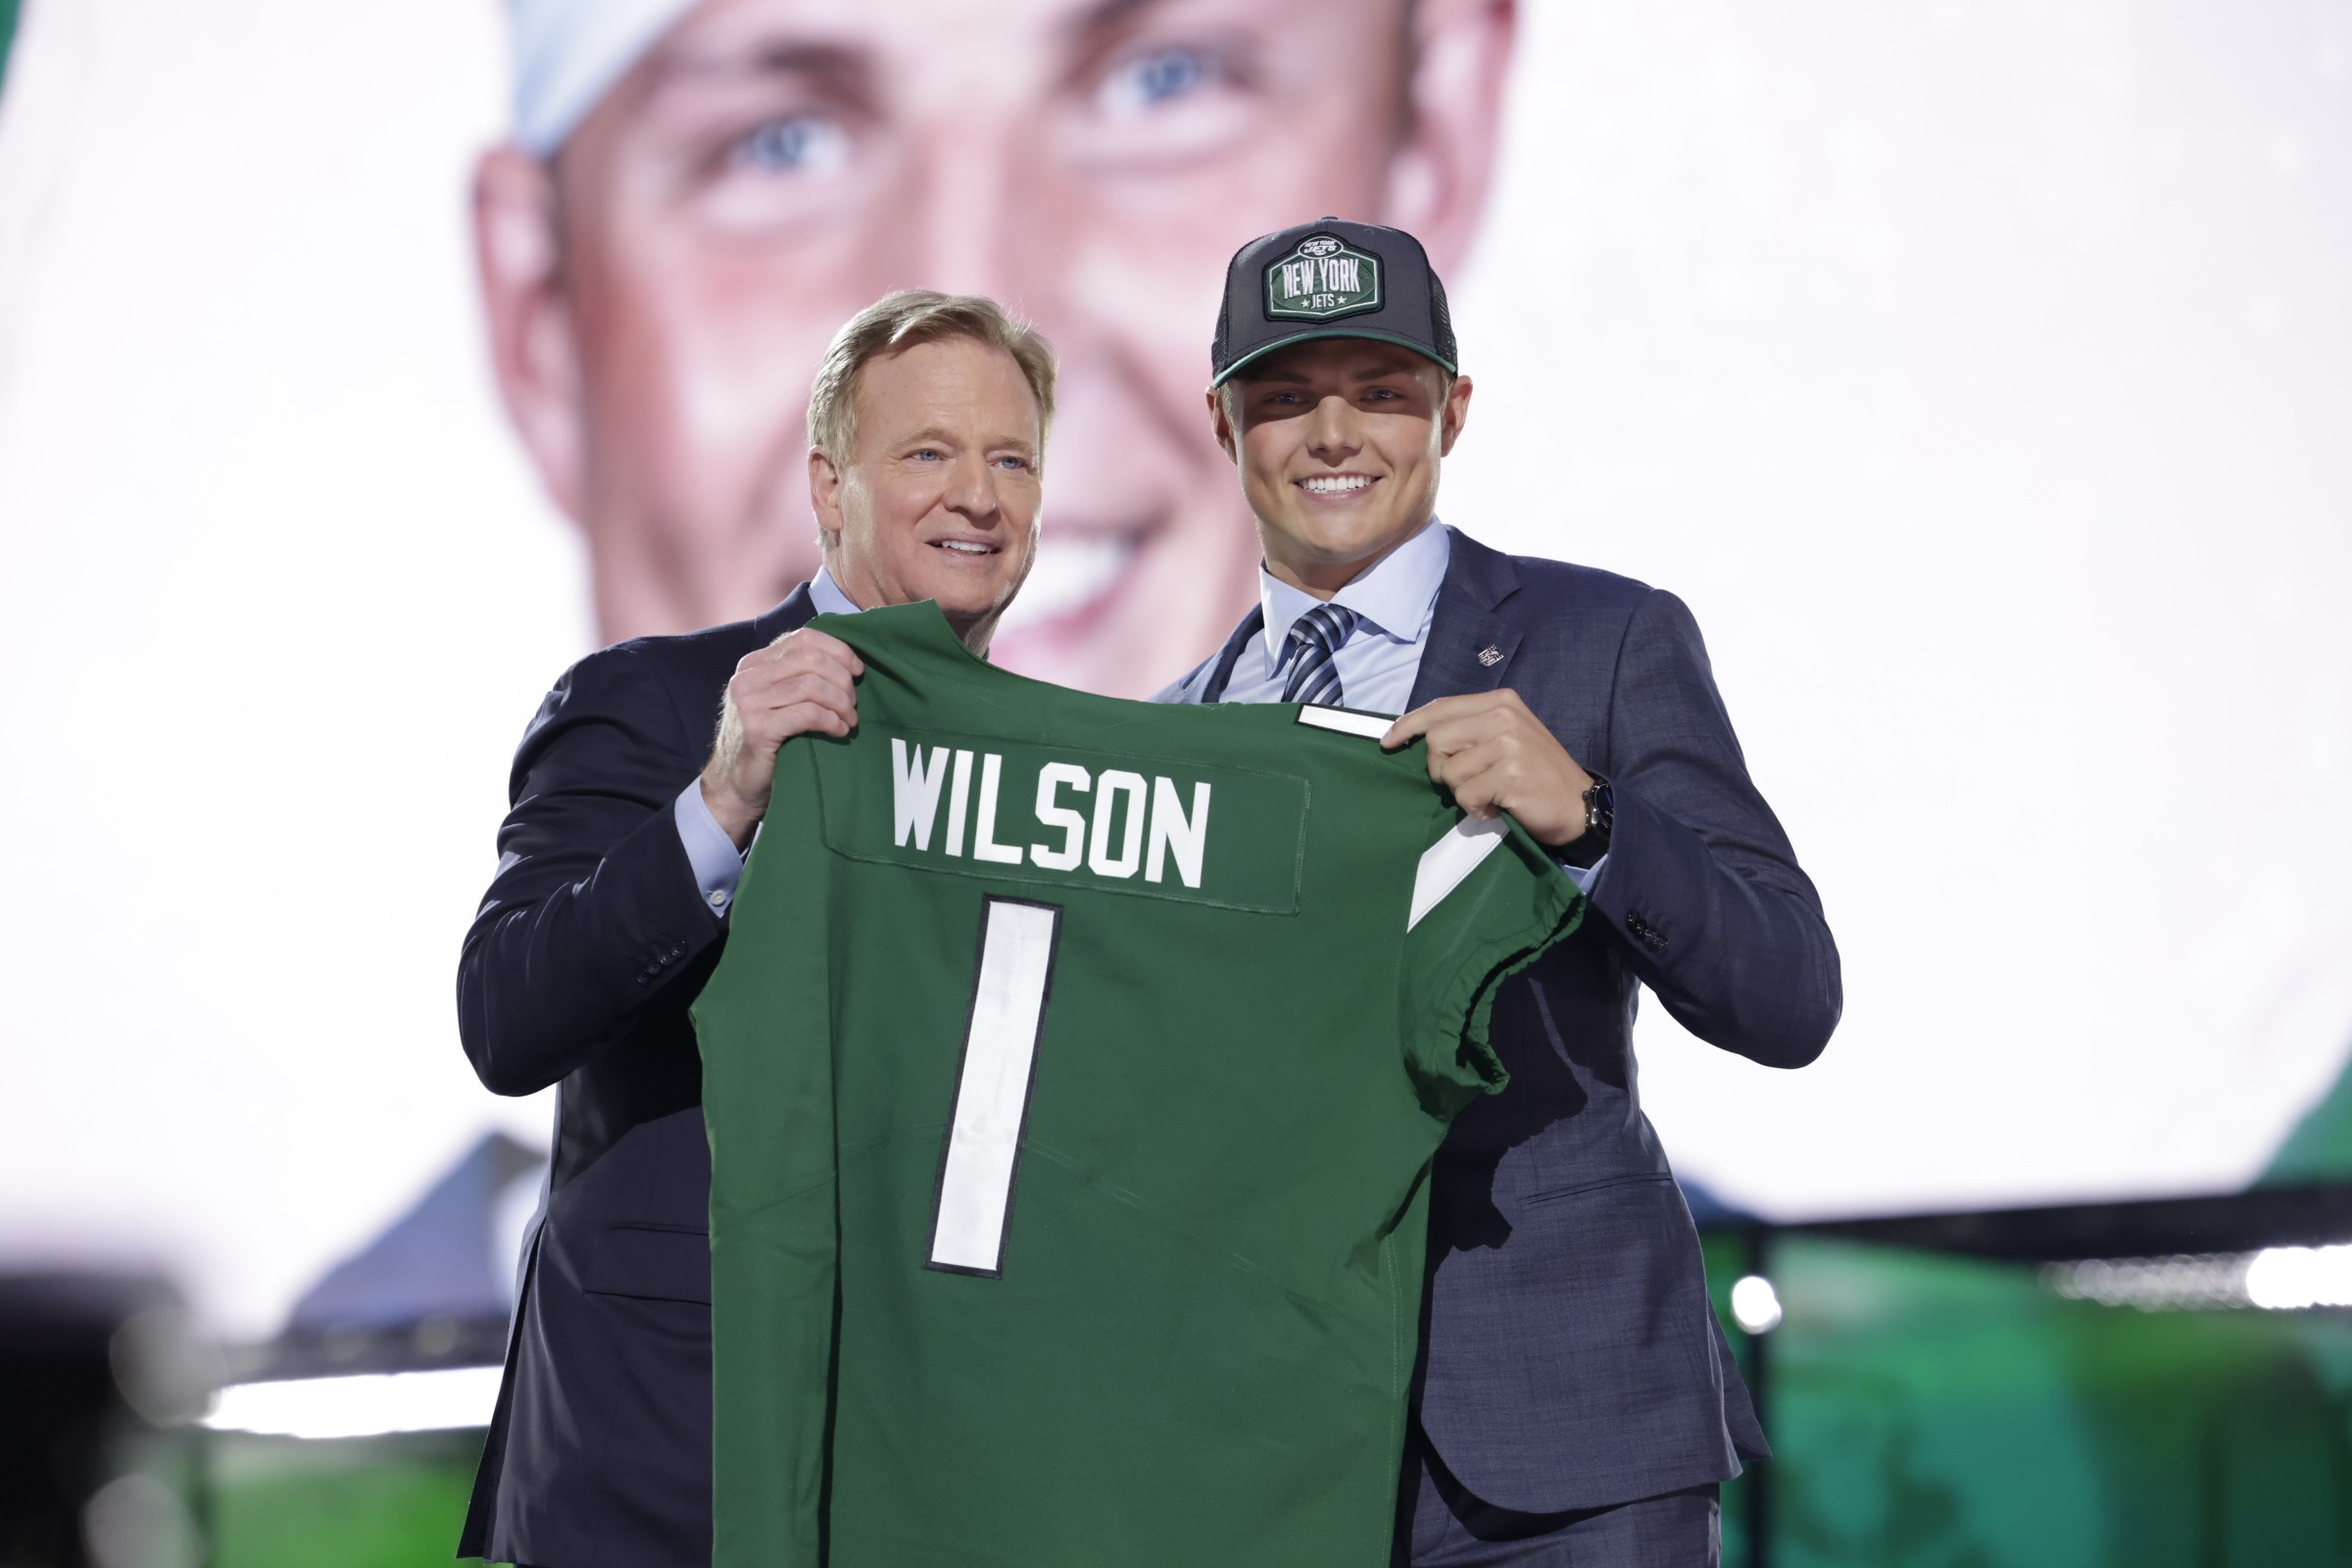 Zach Wilson goes to New York Jets as highest NFL draft pick in BYU